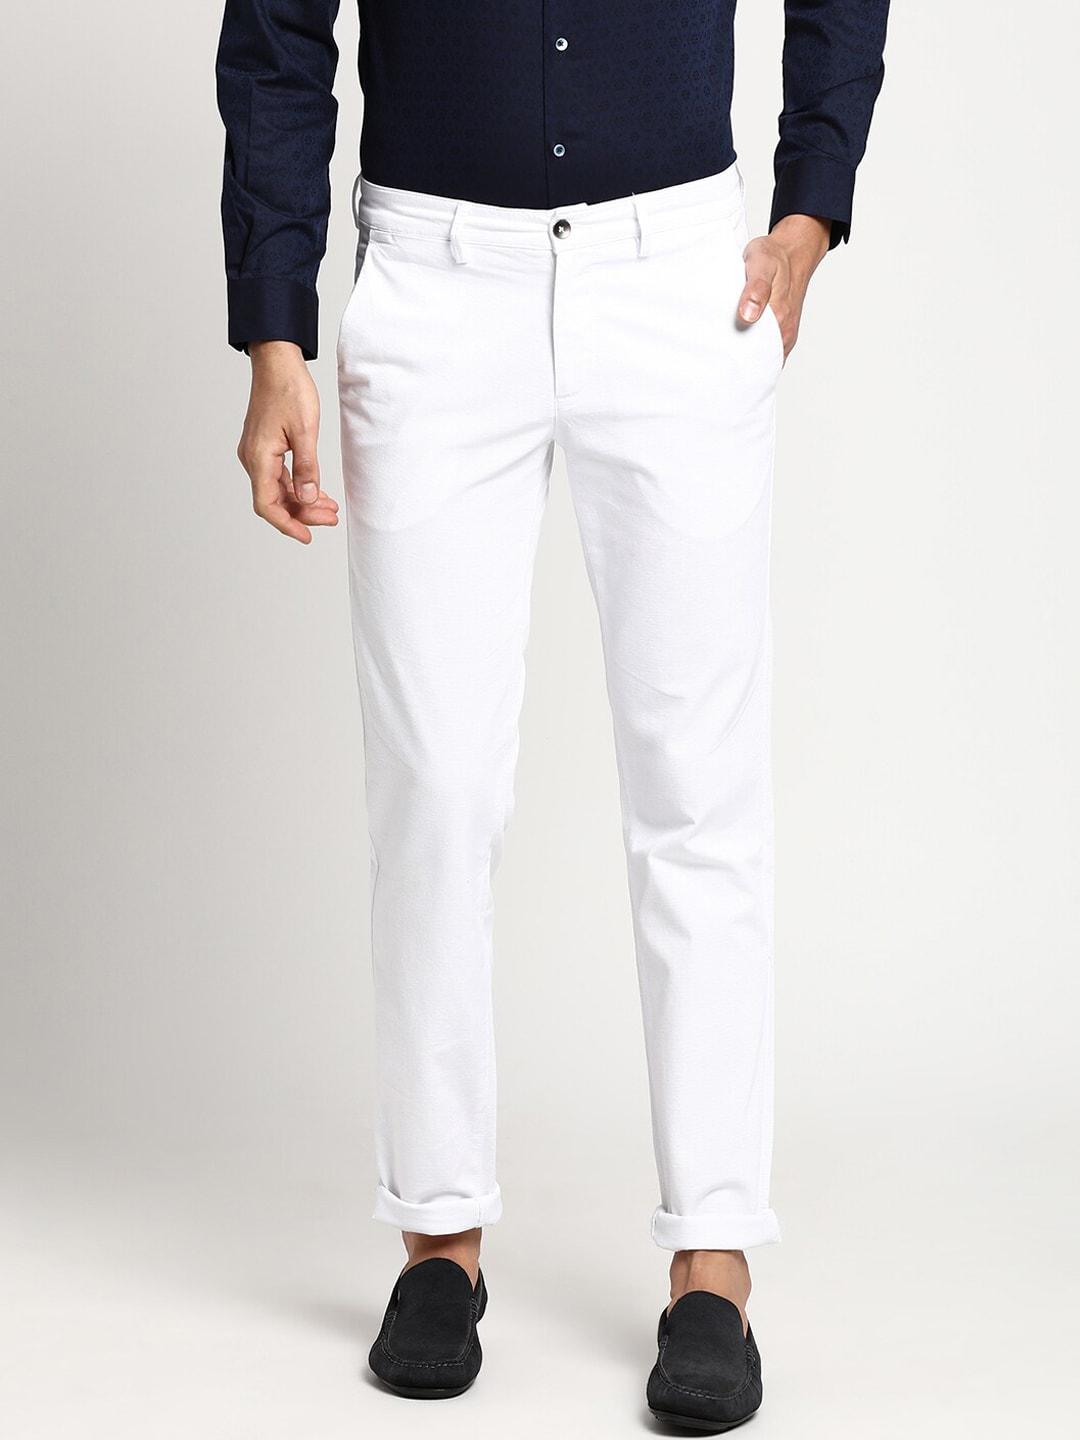 turtle-men-white-solid-cotton-skinny-fit-chinos-trousers